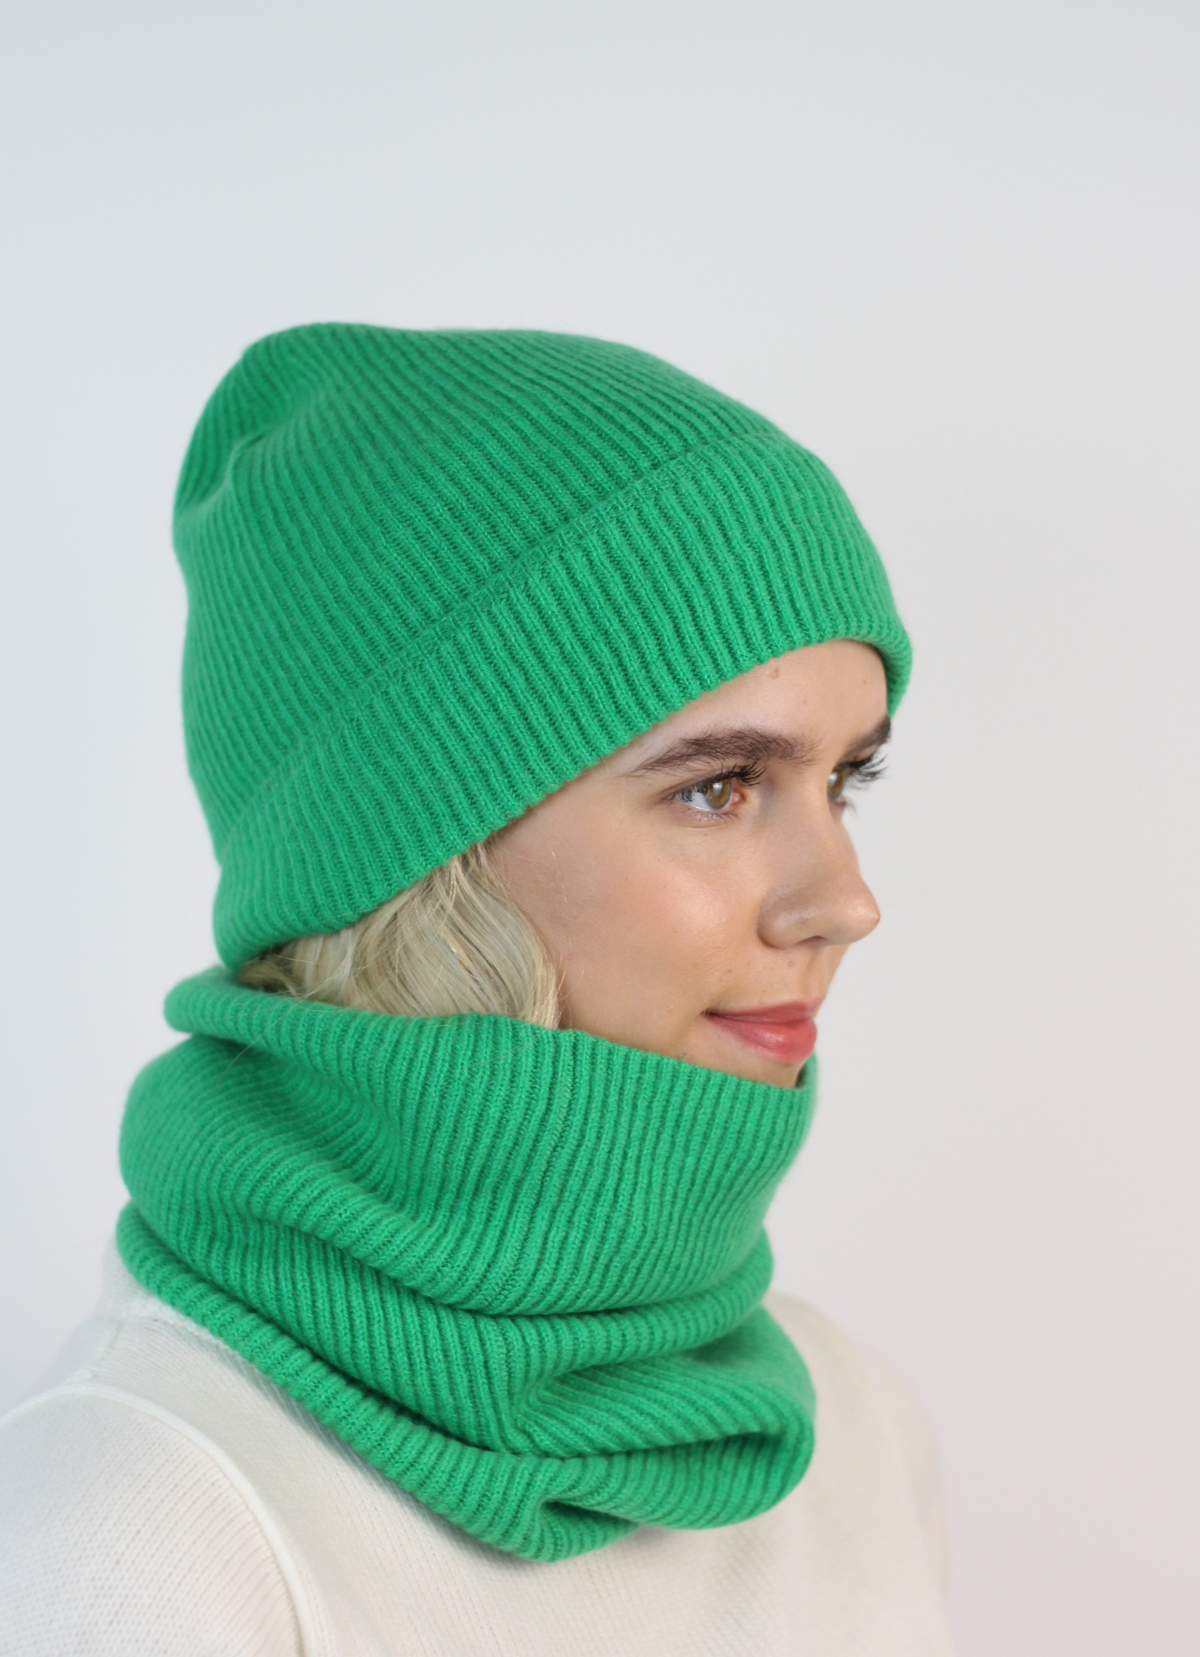 Ribbed beanie hat green 